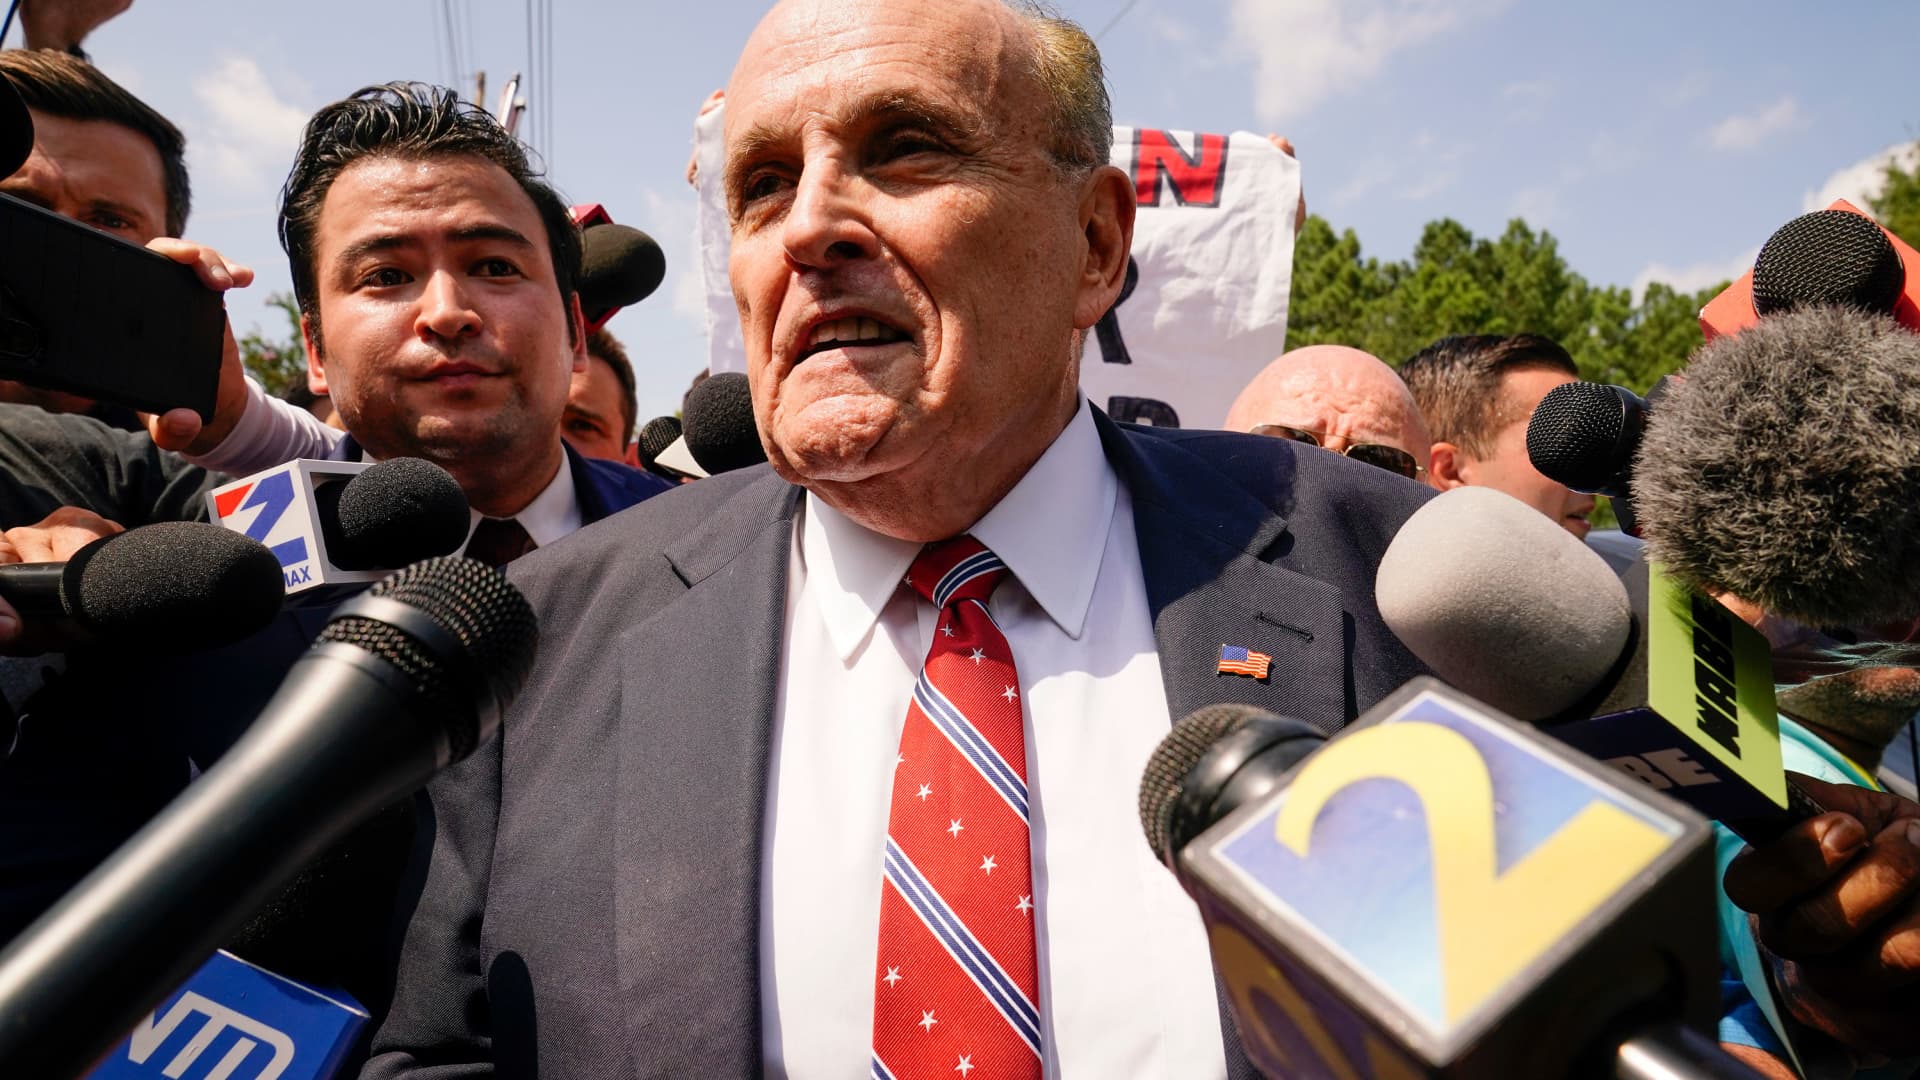 Judge orders default judgment, sanctions against Rudy Giuliani in election workers’ lawsuit